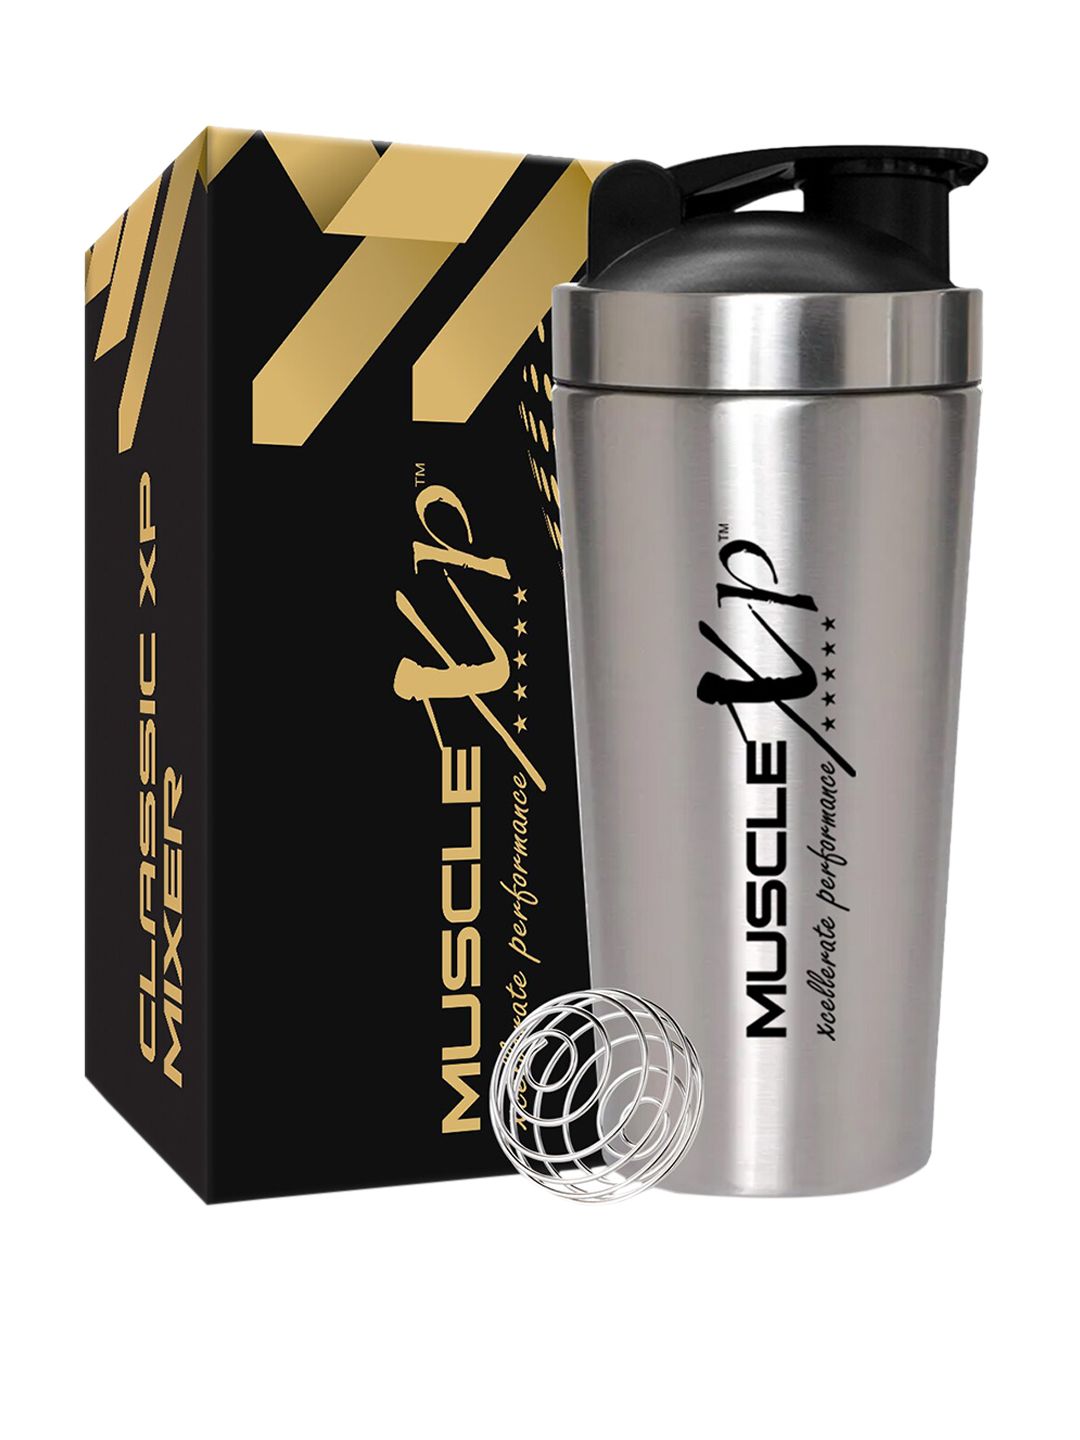 MUSCLEXP Unisex Silver & Black Printed Stainless Steel Shaker Price in India